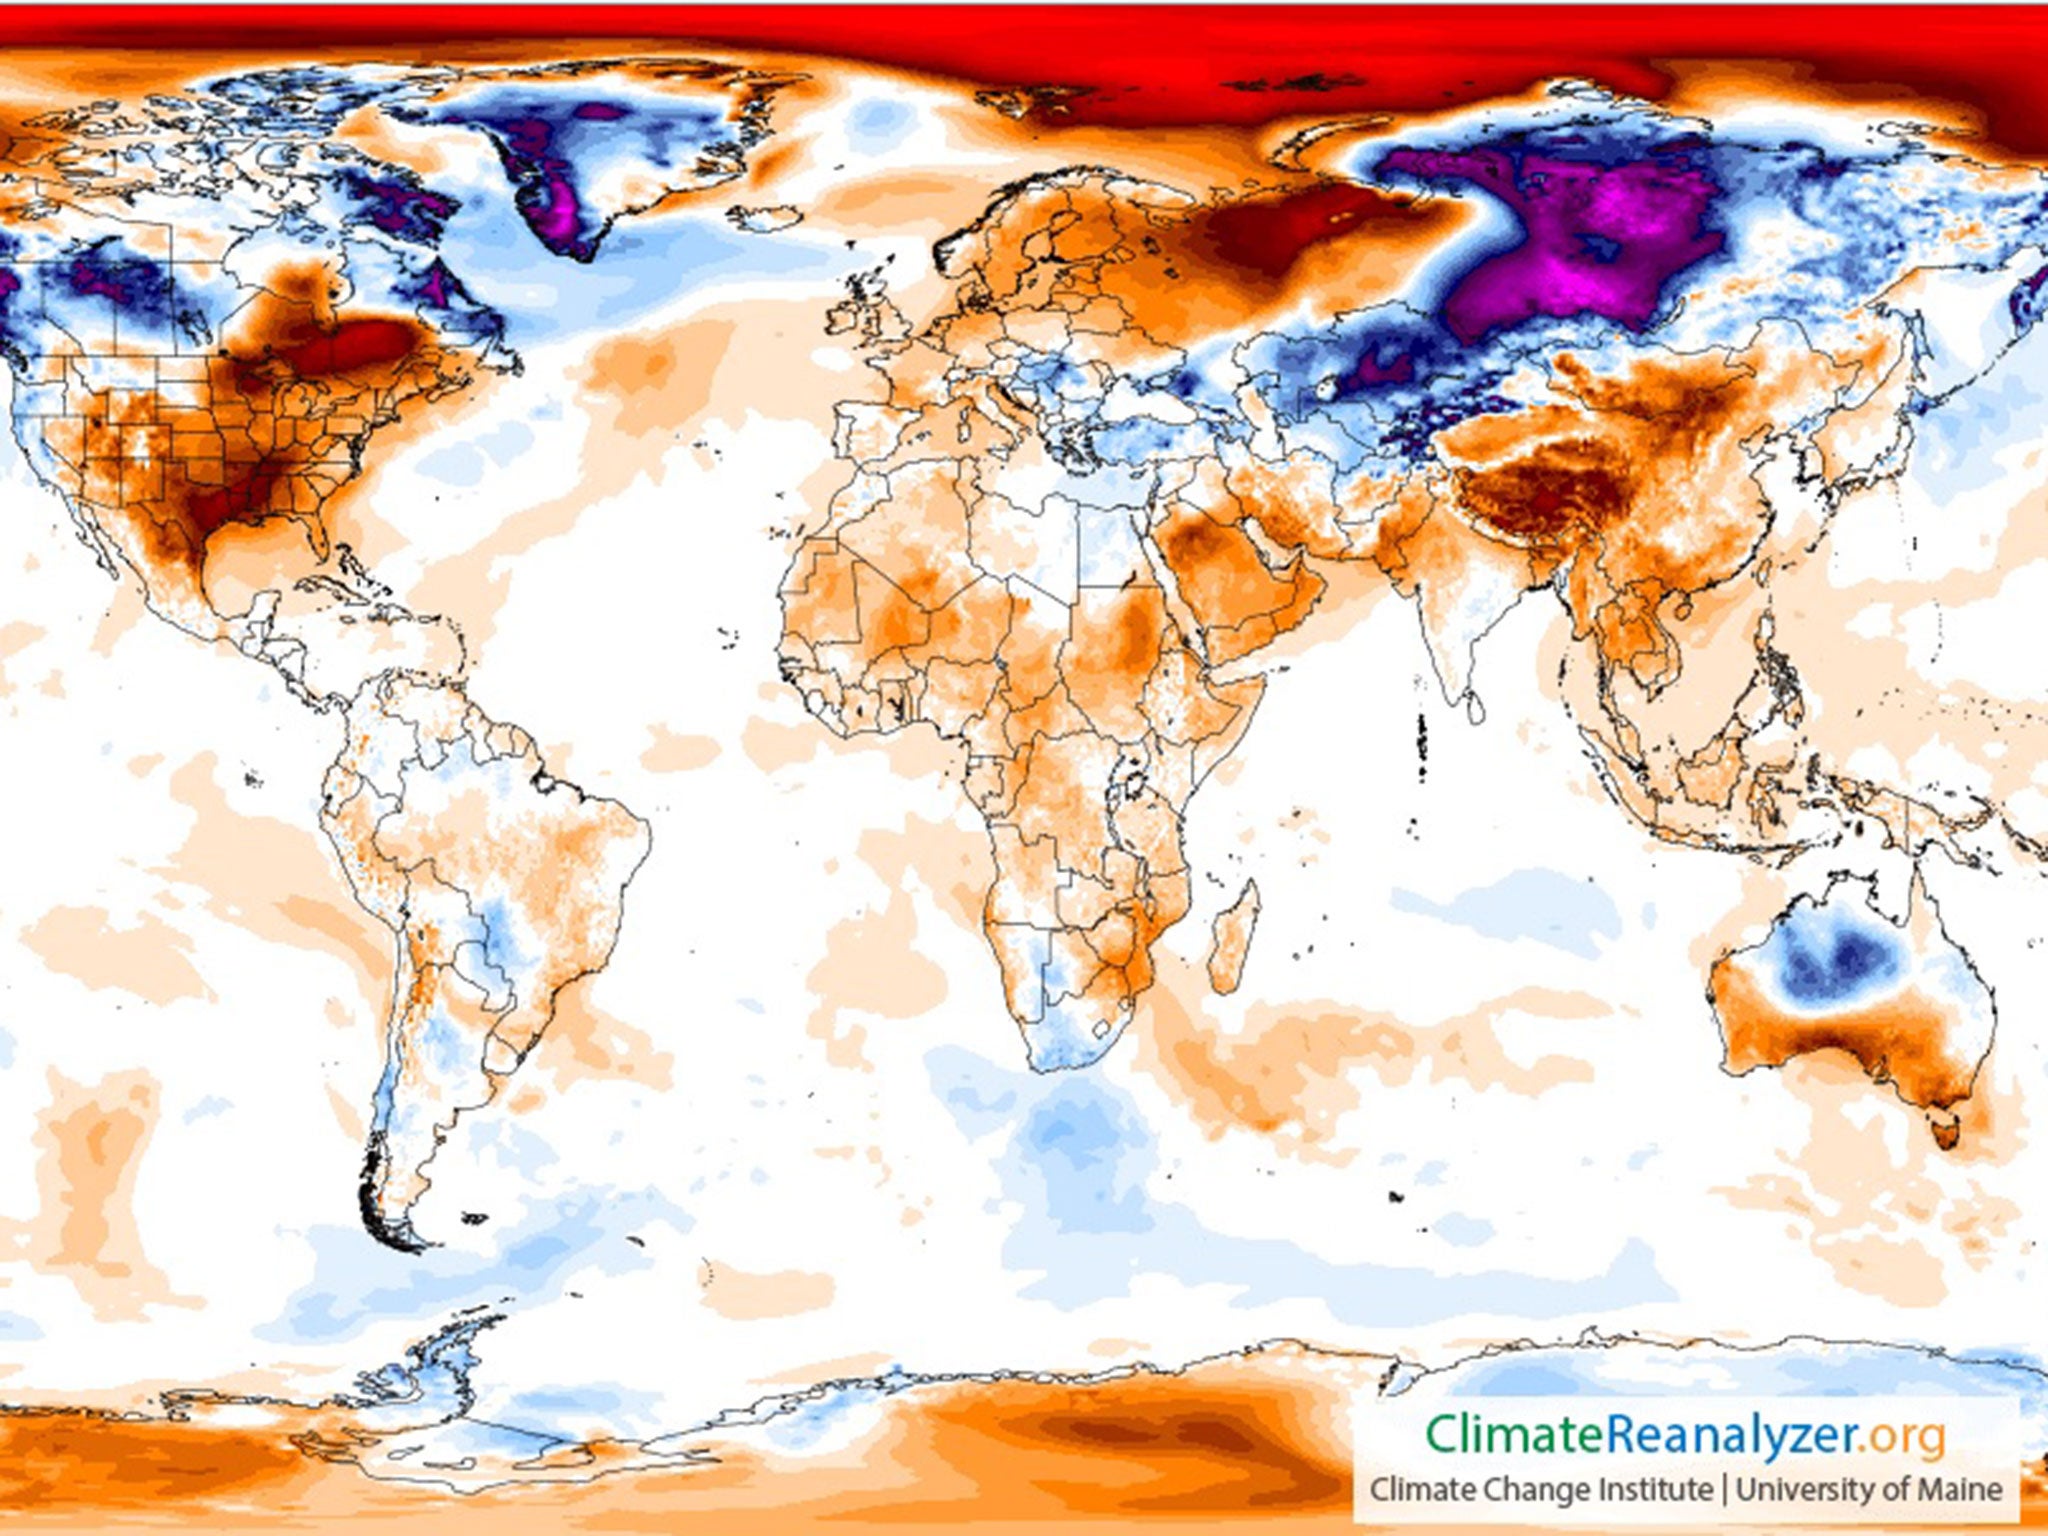 A temperature map of the world on 23 December 2016 shows areas that were warmer (in red) or colder (blue) than normal